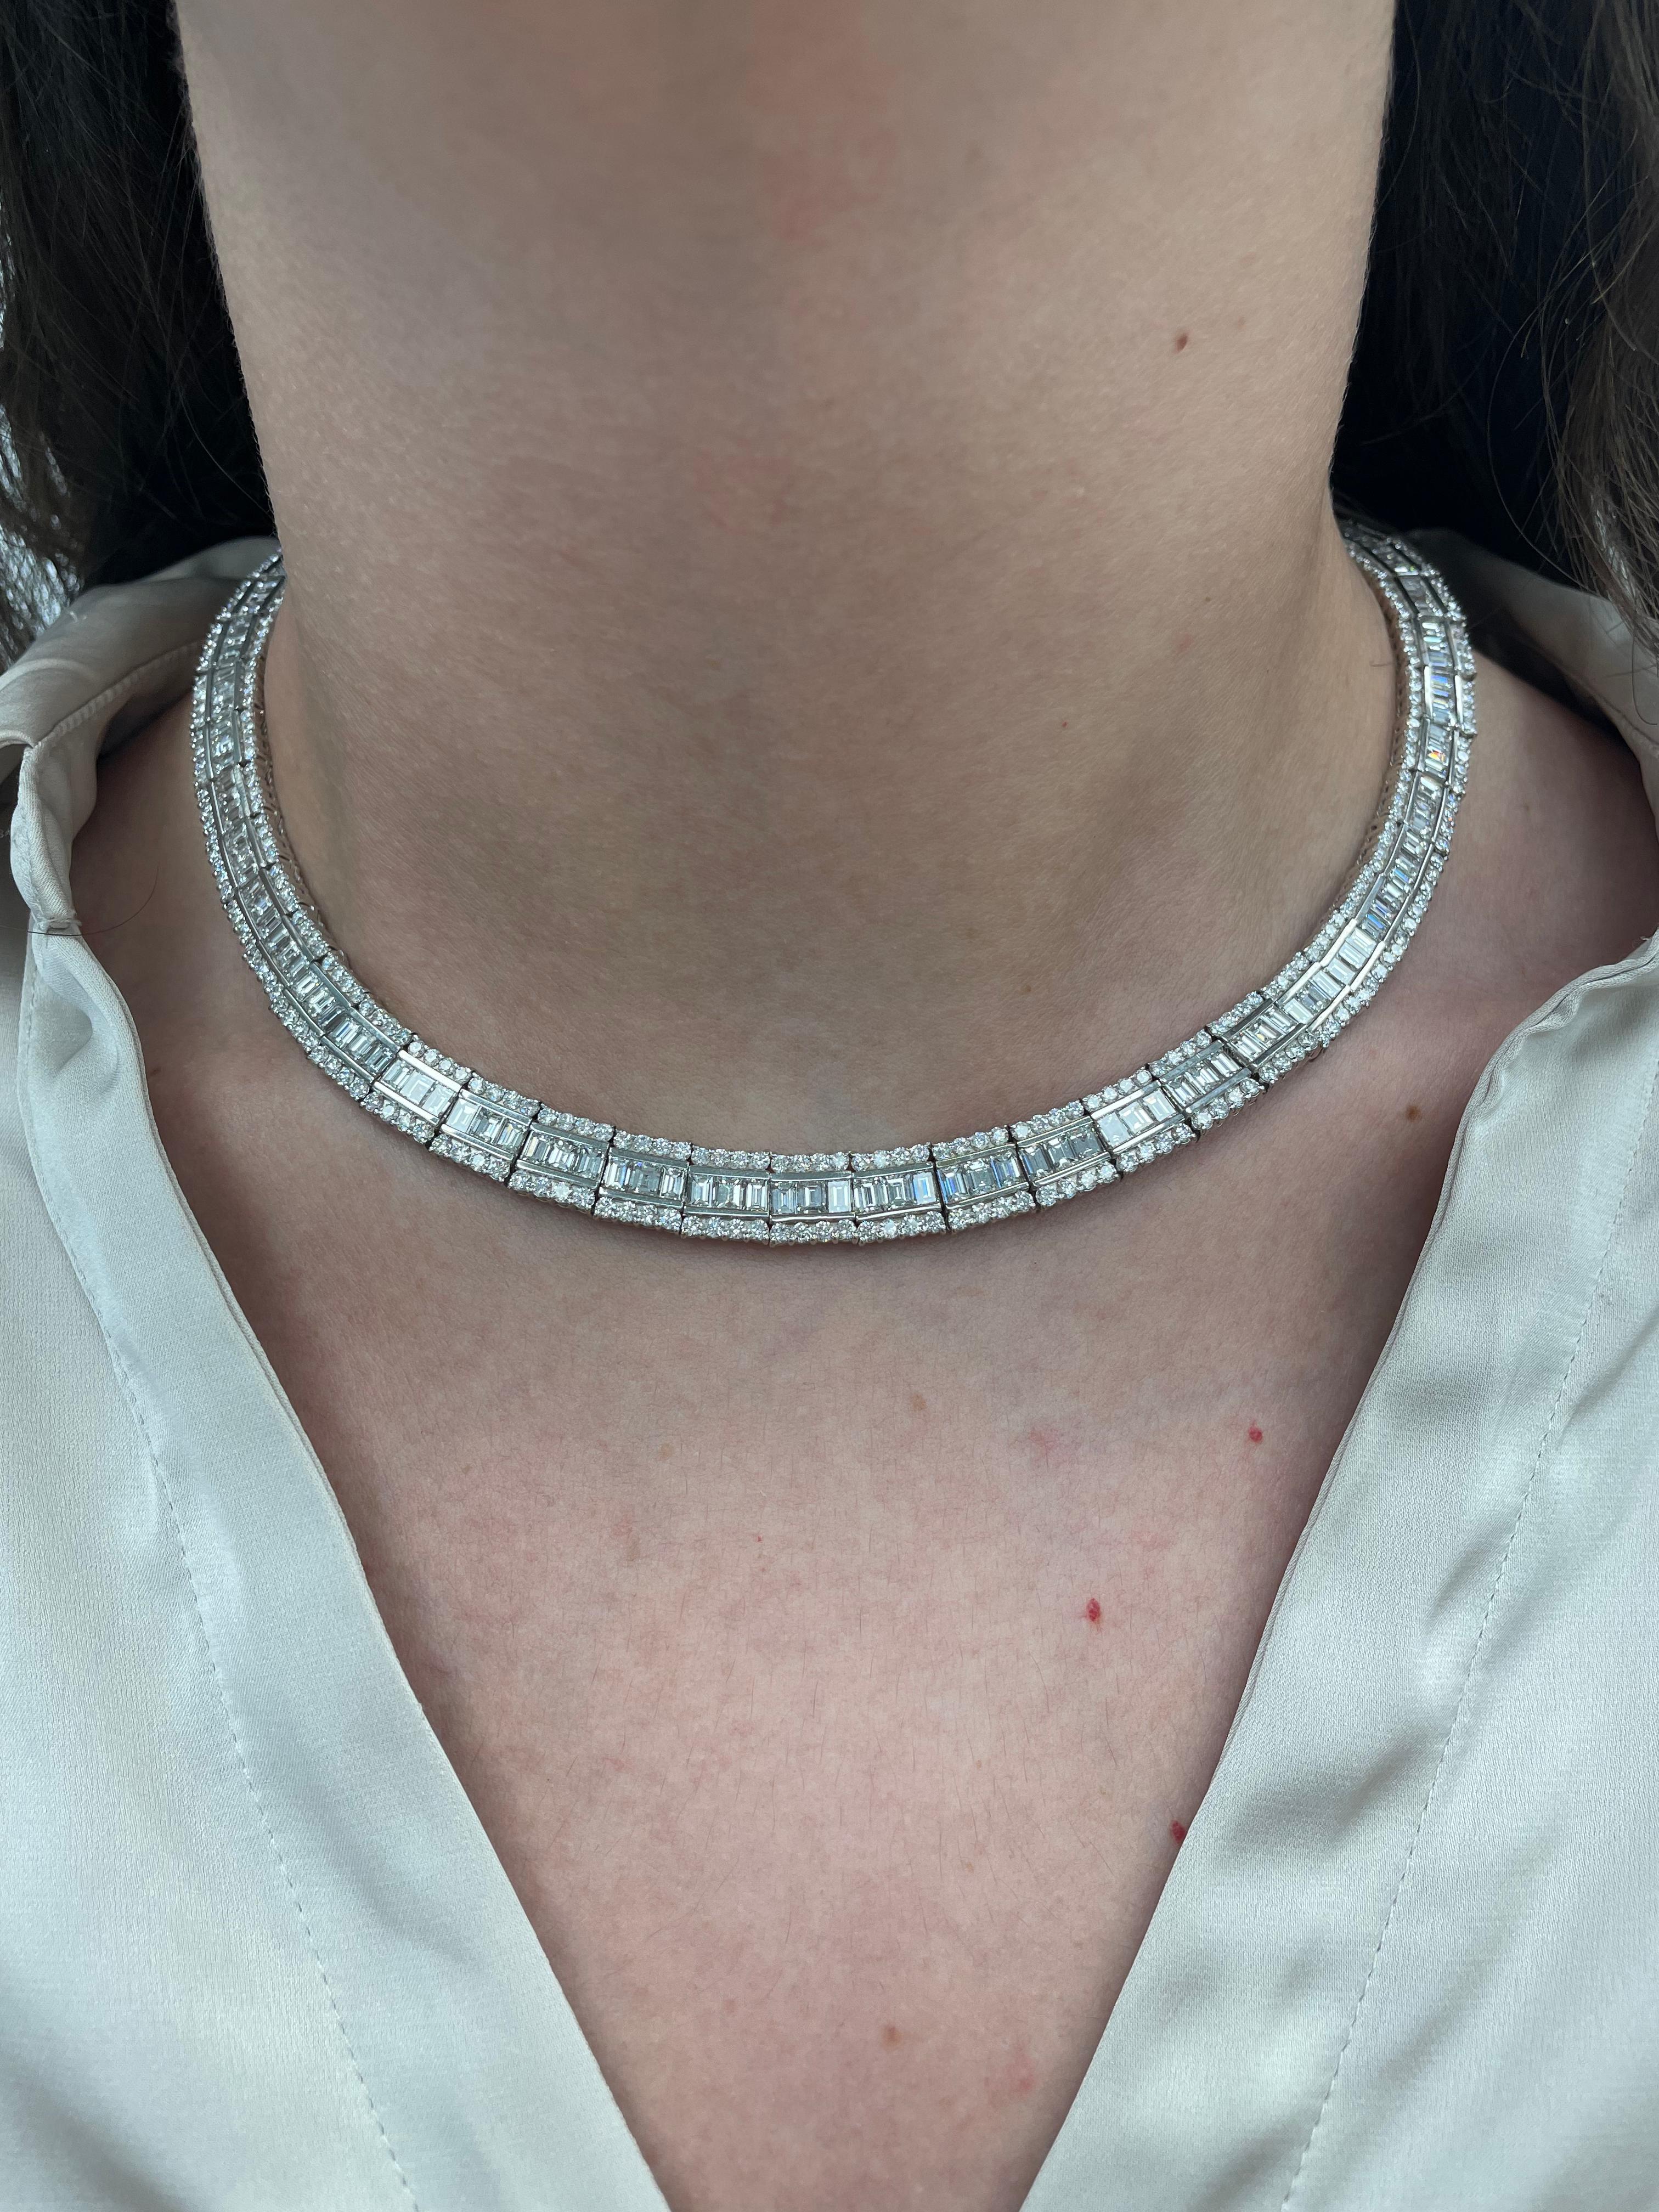 Glamorous baguette cut diamond necklace. High jewelry by Alexander Beverly Hills.
159 baguette cut diamonds, 21.56 carats. Approximately F/G color and VS clarity. Complimented by 424 round brilliant diamonds, 10.17 carats. Approximately F/G color